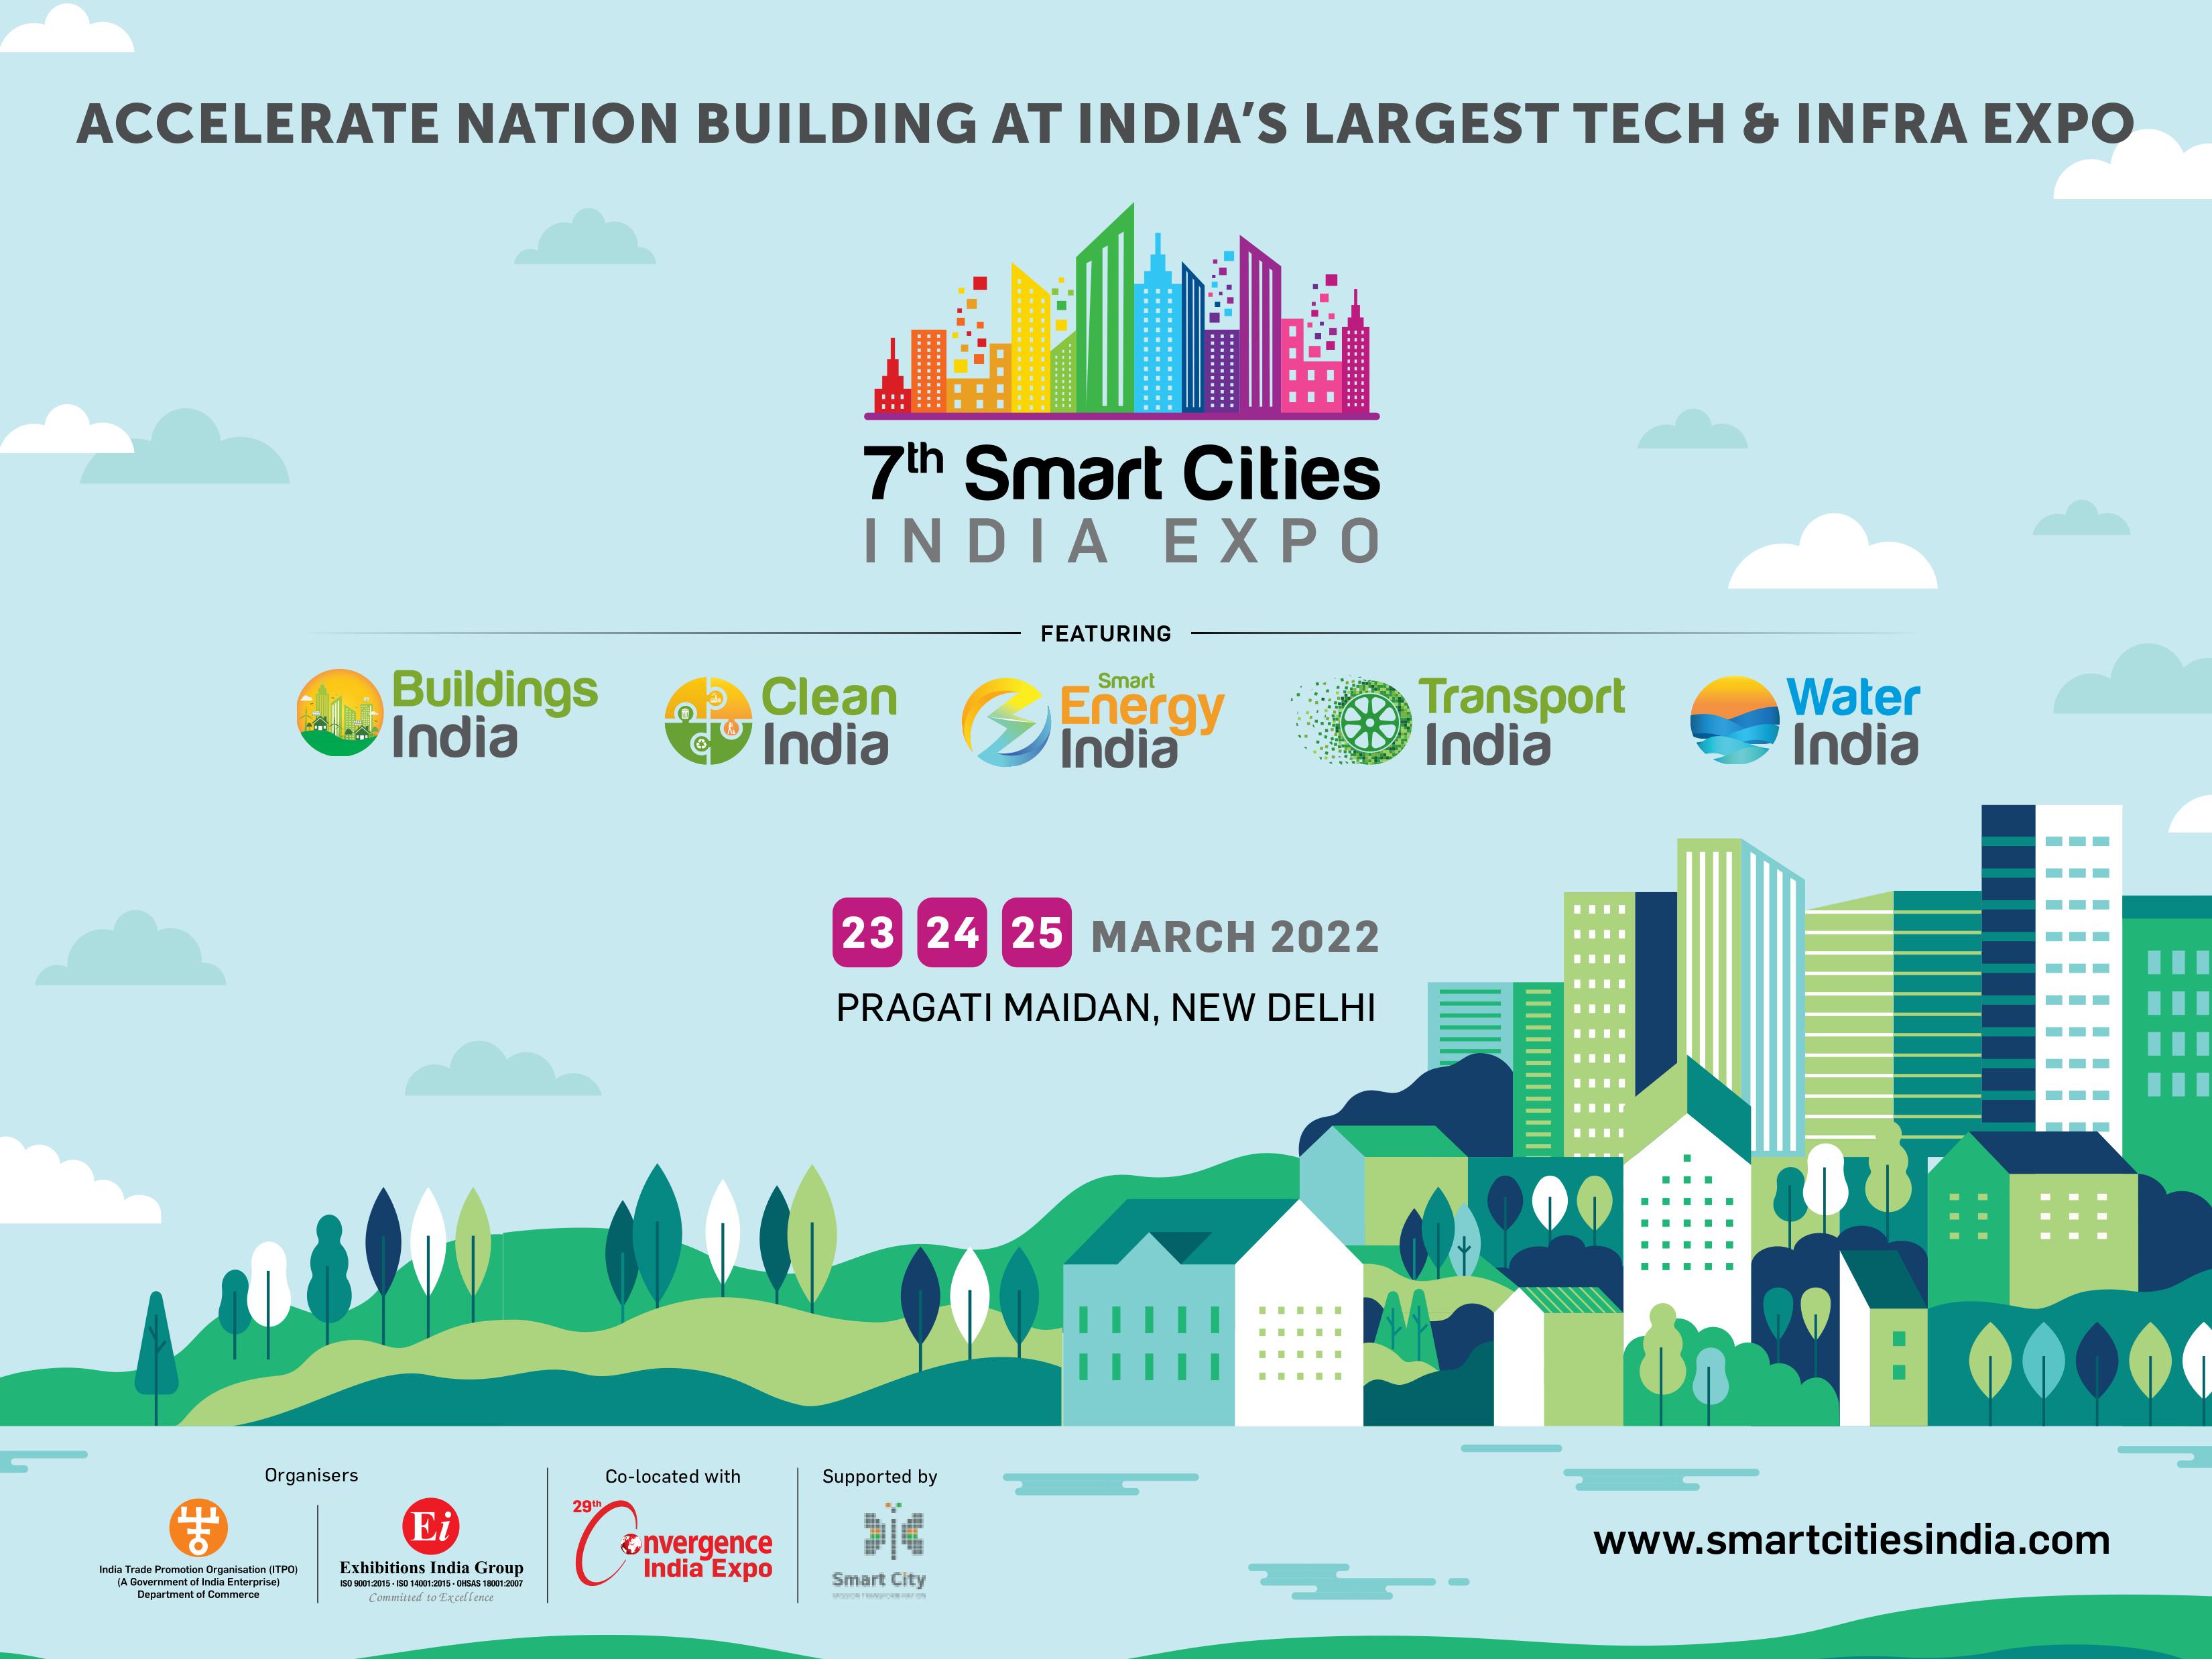 Top city initiatives awarded under 7th Smart Cities India Expo